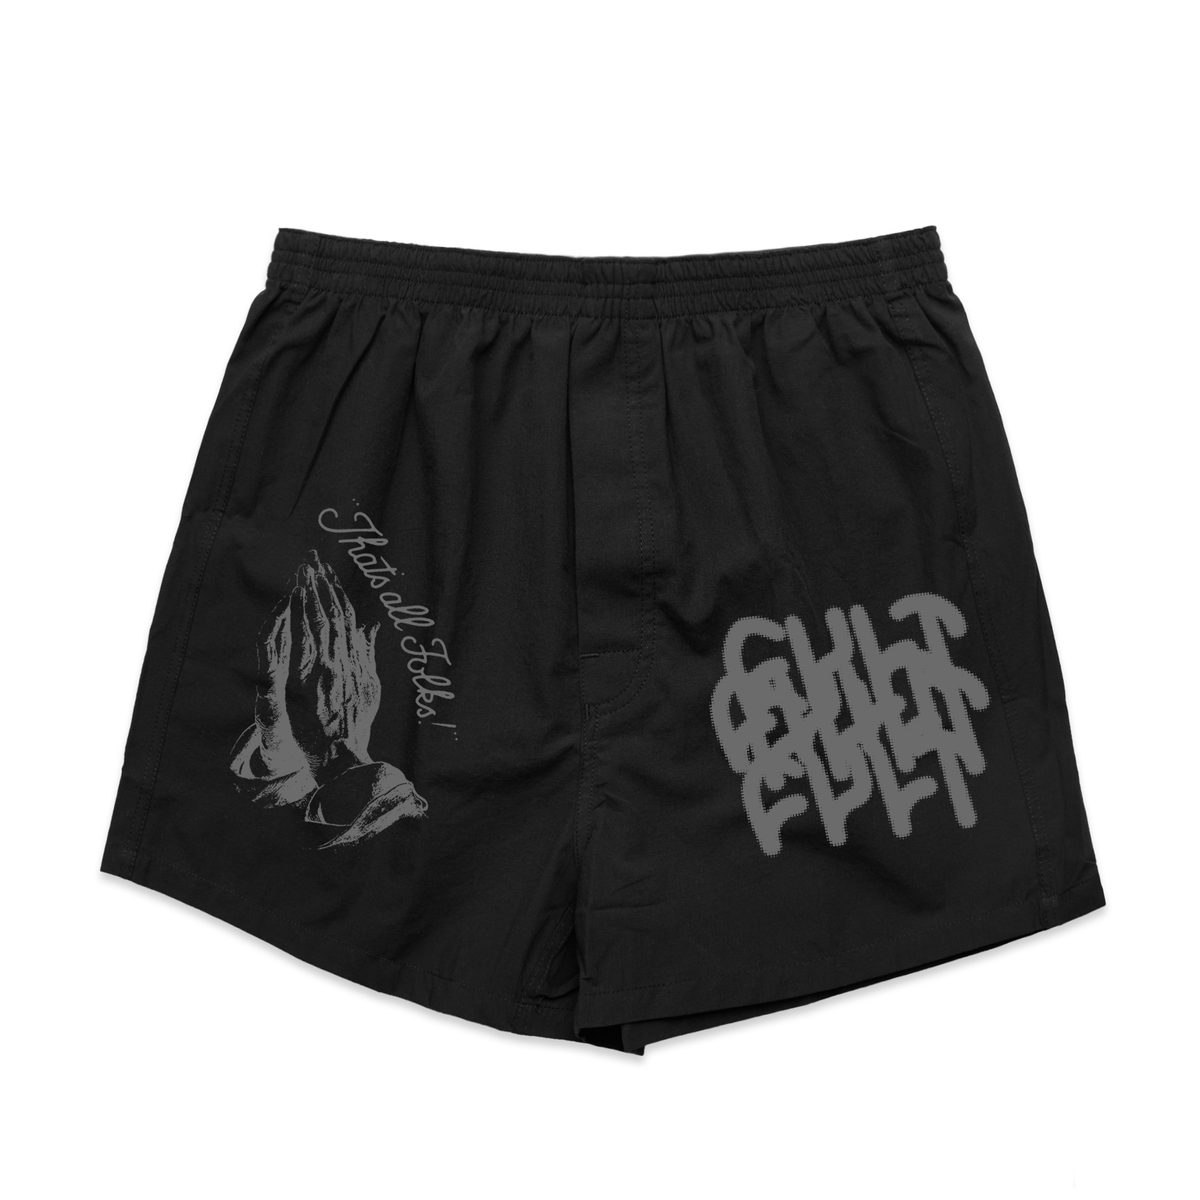 That's All Folks Boxers / black